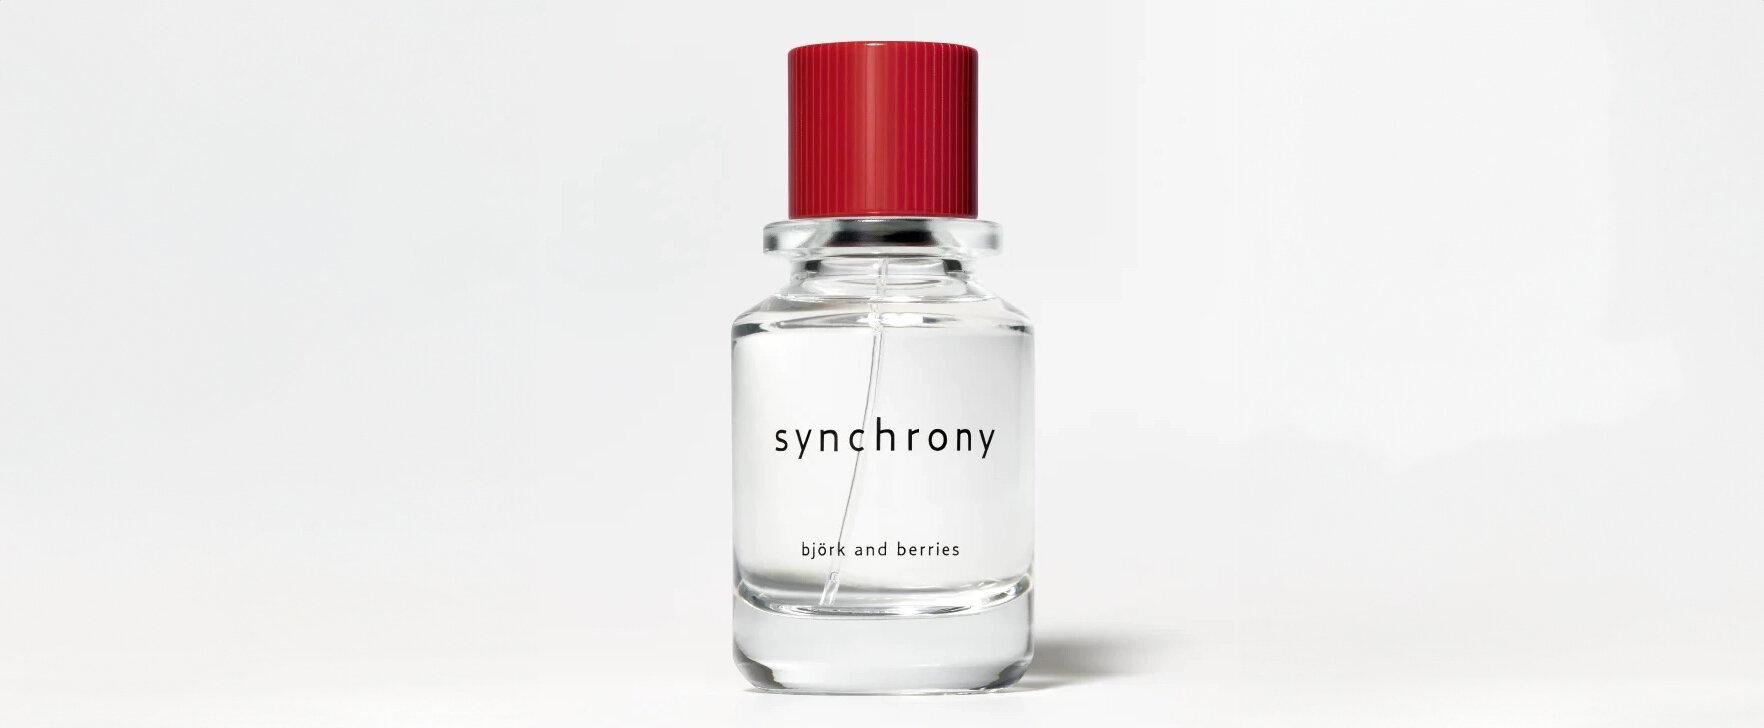 The Unisex Fragrance "Synchrony" by Björk & Berries: An Ode to Architecture